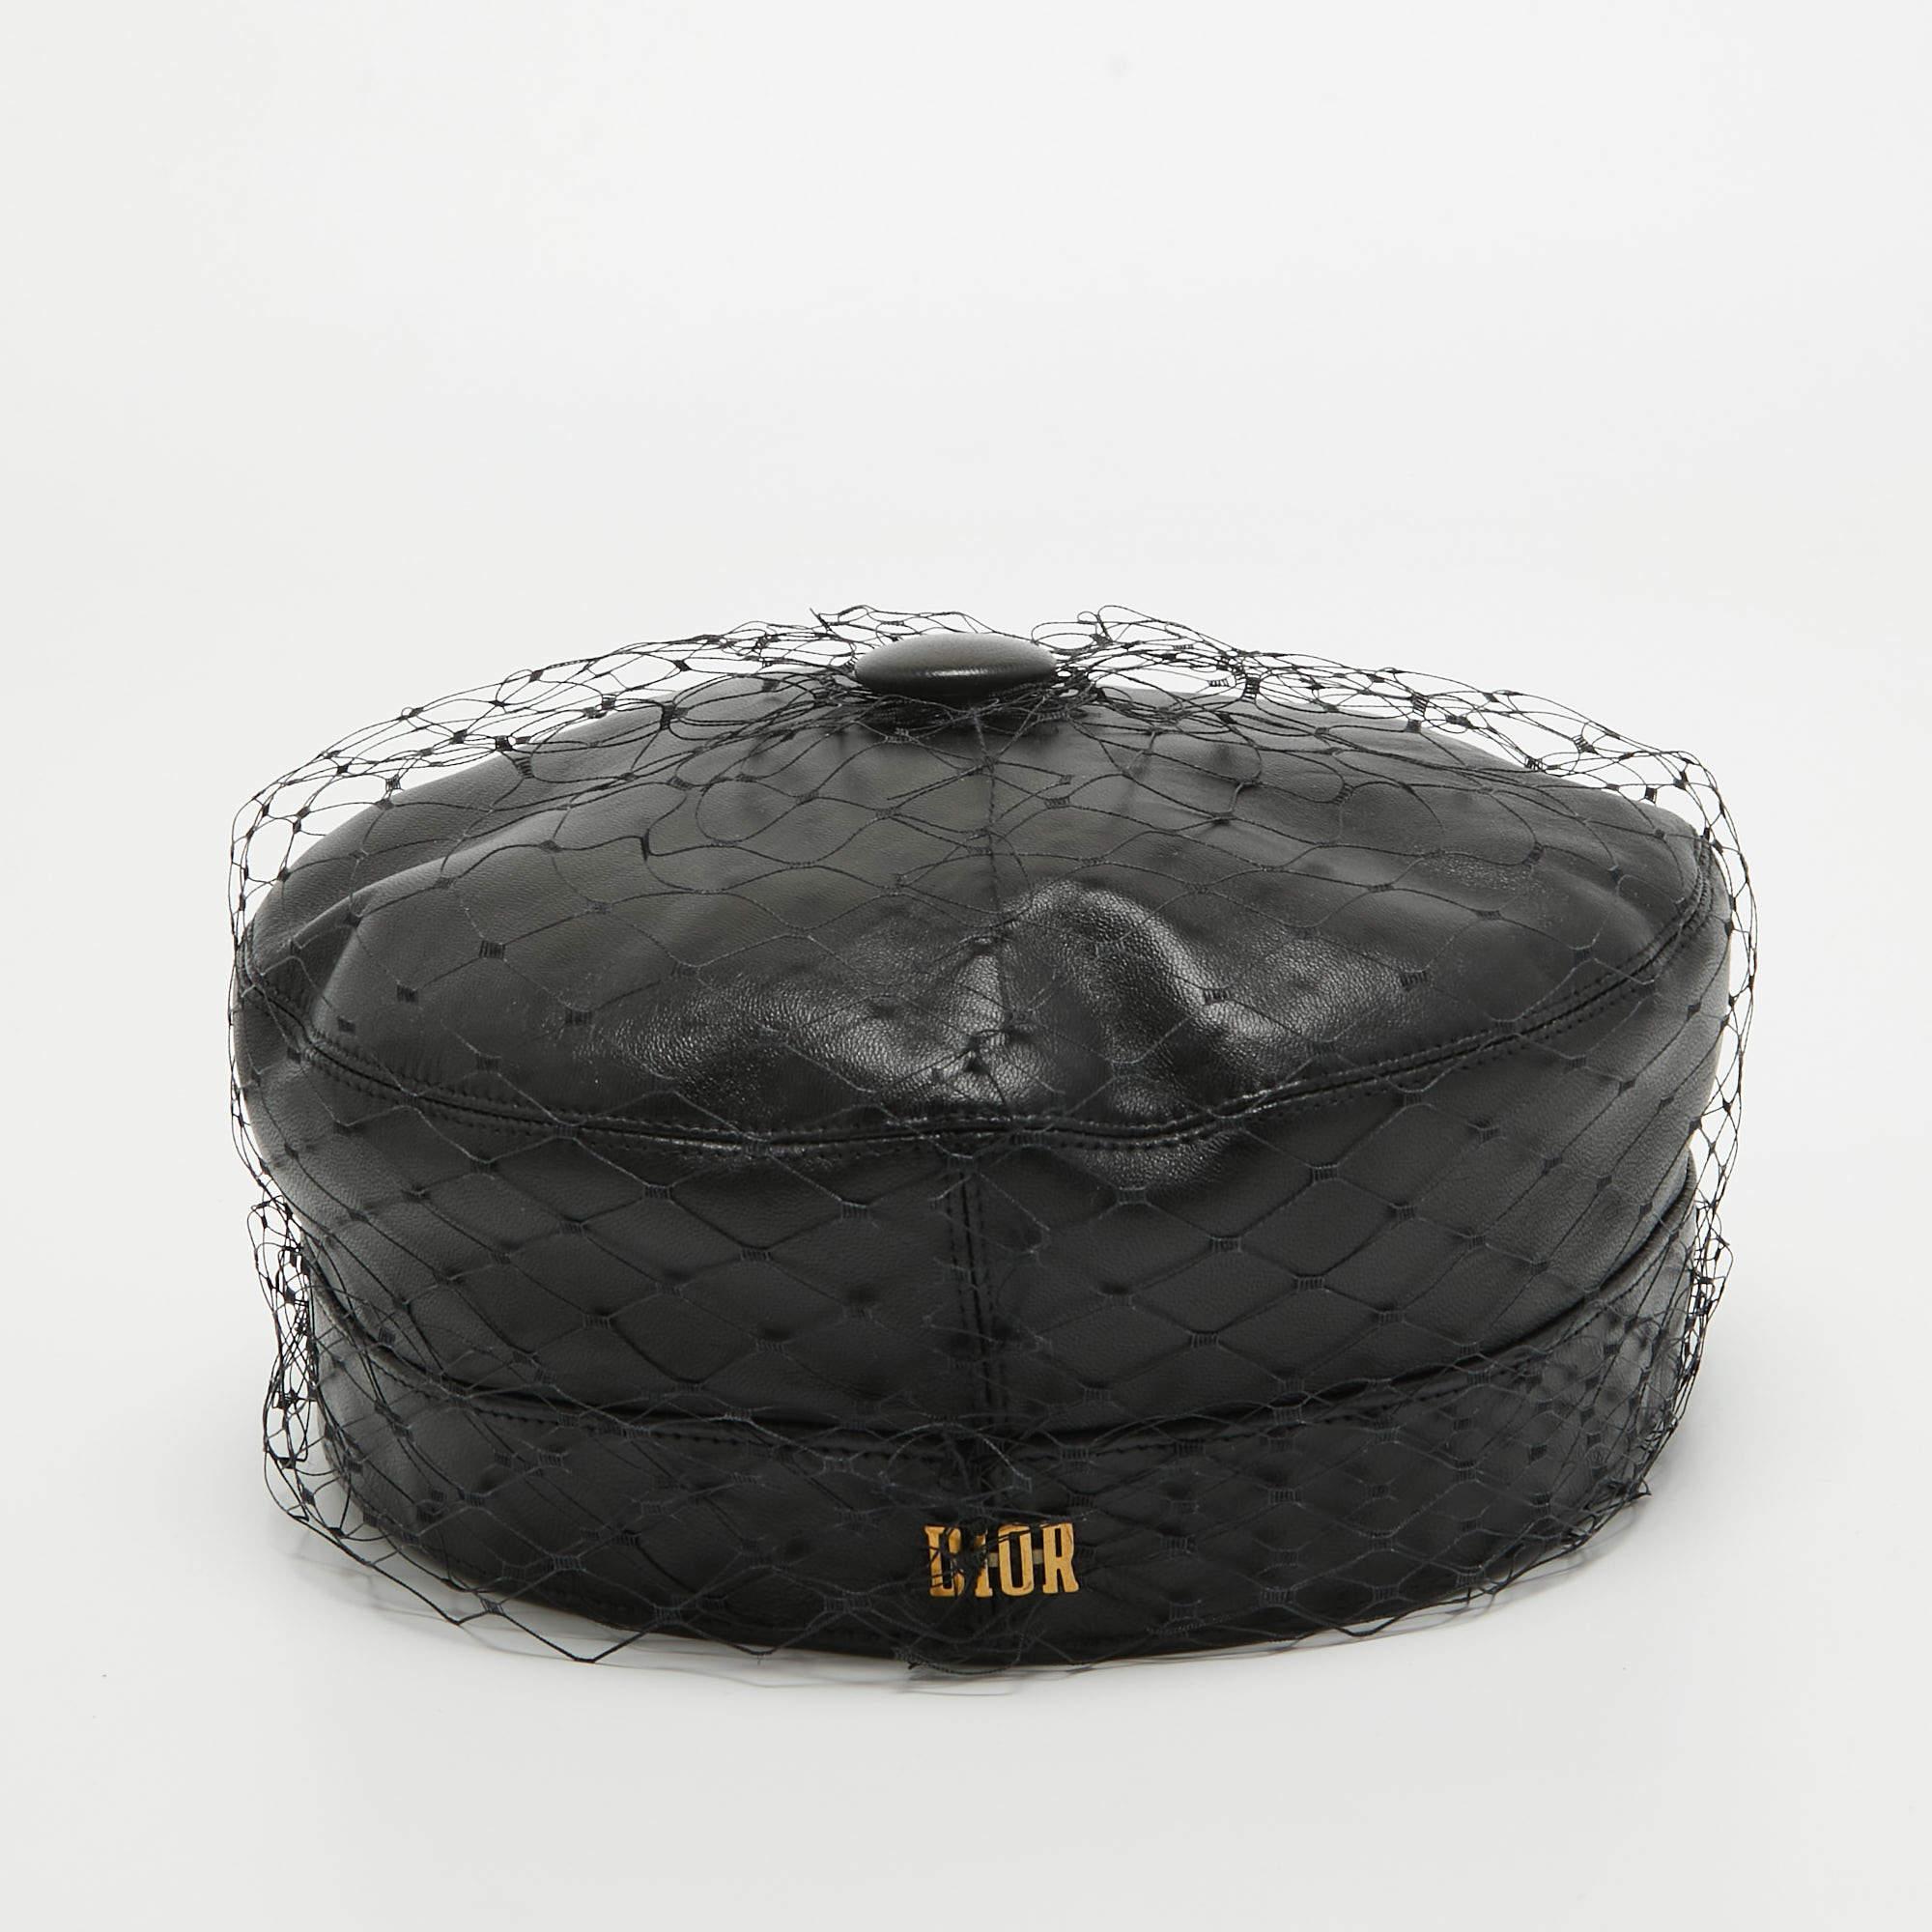 Let style rule your daily wardrobe. Dior brings this extremely chic cap crafted out of lightweight cotton, with a mesh veil covering it all over and the brand logo at the rear. A must-have accessory indeed!

